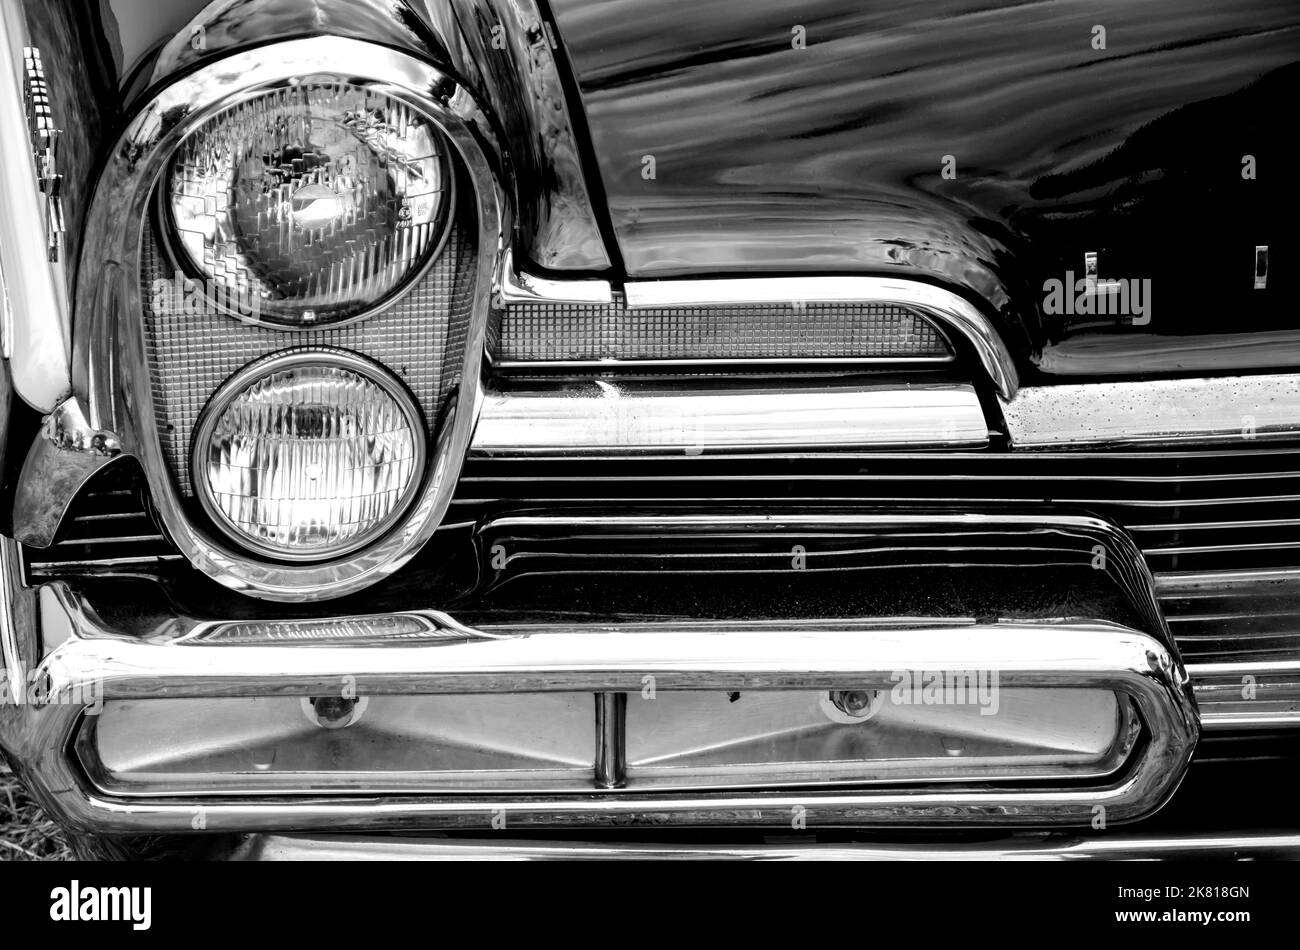 Headlight and front end detail of a 1957 Lincoln Continental (black and white image) Stock Photo